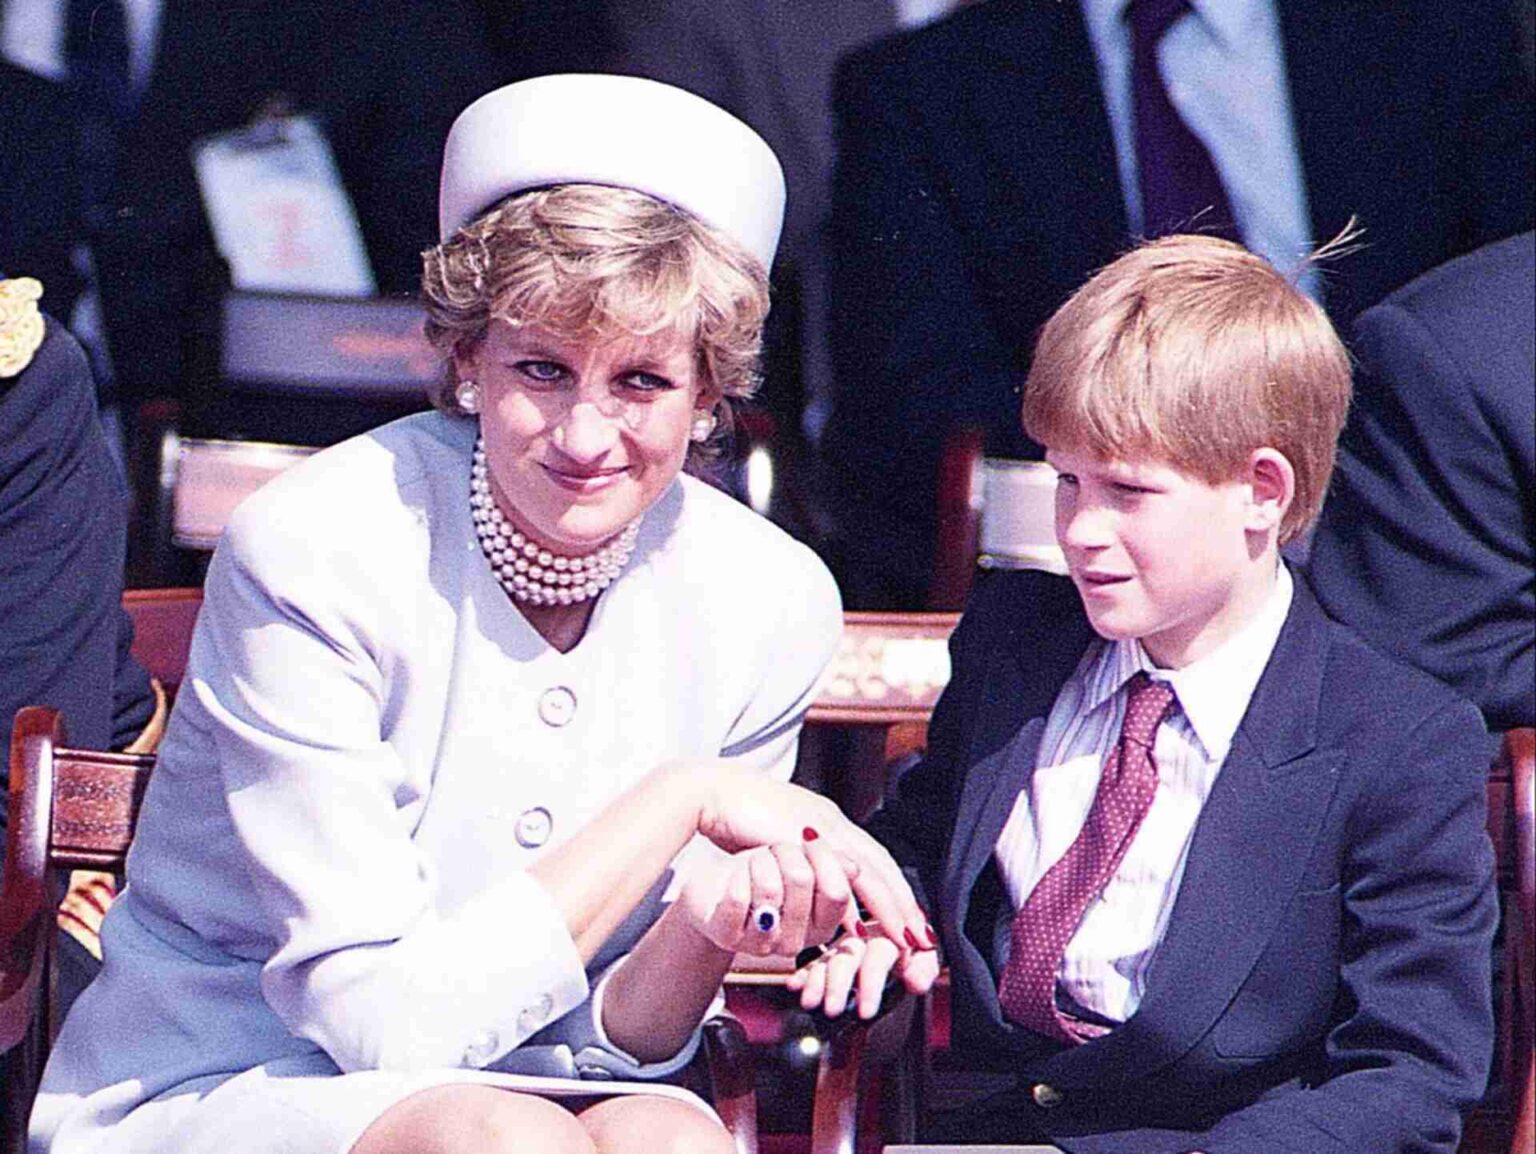 The passing of Princess Diana was a moment in history that shocked the entire world. What were her last words before the tragic accident?